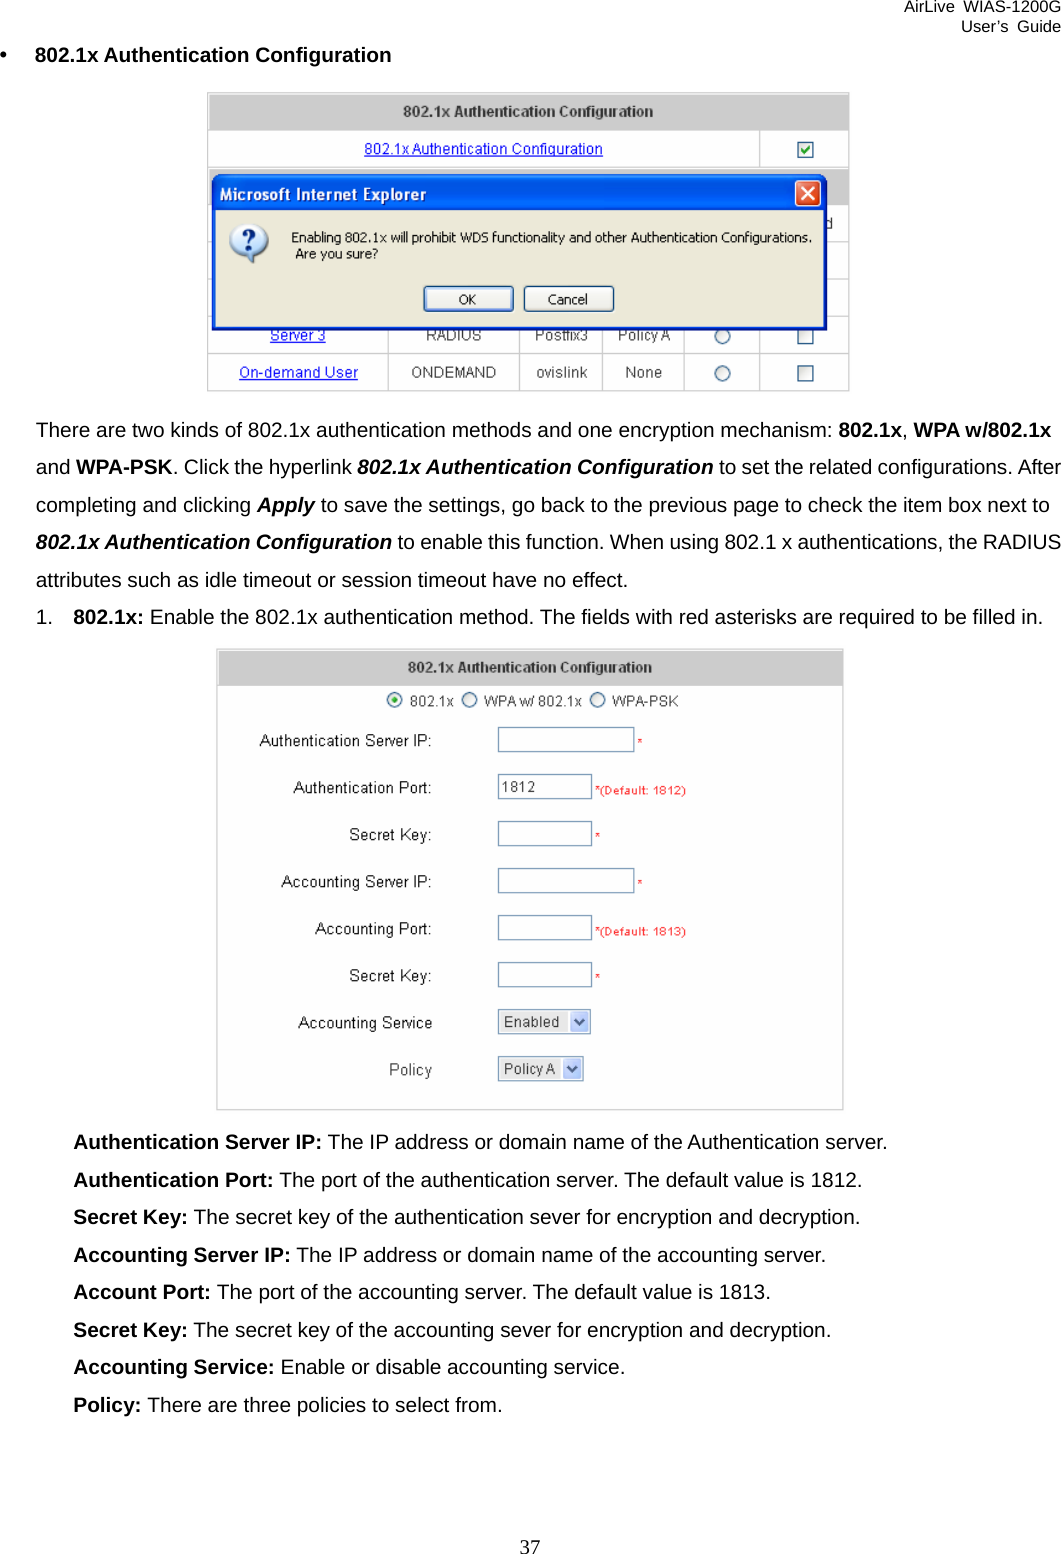 AirLive WIAS-1200G User’s Guide 37 y 802.1x Authentication Configuration  There are two kinds of 802.1x authentication methods and one encryption mechanism: 802.1x, WPA w/802.1x and WPA-PSK. Click the hyperlink 802.1x Authentication Configuration to set the related configurations. After completing and clicking Apply to save the settings, go back to the previous page to check the item box next to 802.1x Authentication Configuration to enable this function. When using 802.1 x authentications, the RADIUS attributes such as idle timeout or session timeout have no effect. 1.  802.1x: Enable the 802.1x authentication method. The fields with red asterisks are required to be filled in.  Authentication Server IP: The IP address or domain name of the Authentication server. Authentication Port: The port of the authentication server. The default value is 1812. Secret Key: The secret key of the authentication sever for encryption and decryption. Accounting Server IP: The IP address or domain name of the accounting server. Account Port: The port of the accounting server. The default value is 1813. Secret Key: The secret key of the accounting sever for encryption and decryption. Accounting Service: Enable or disable accounting service. Policy: There are three policies to select from.    